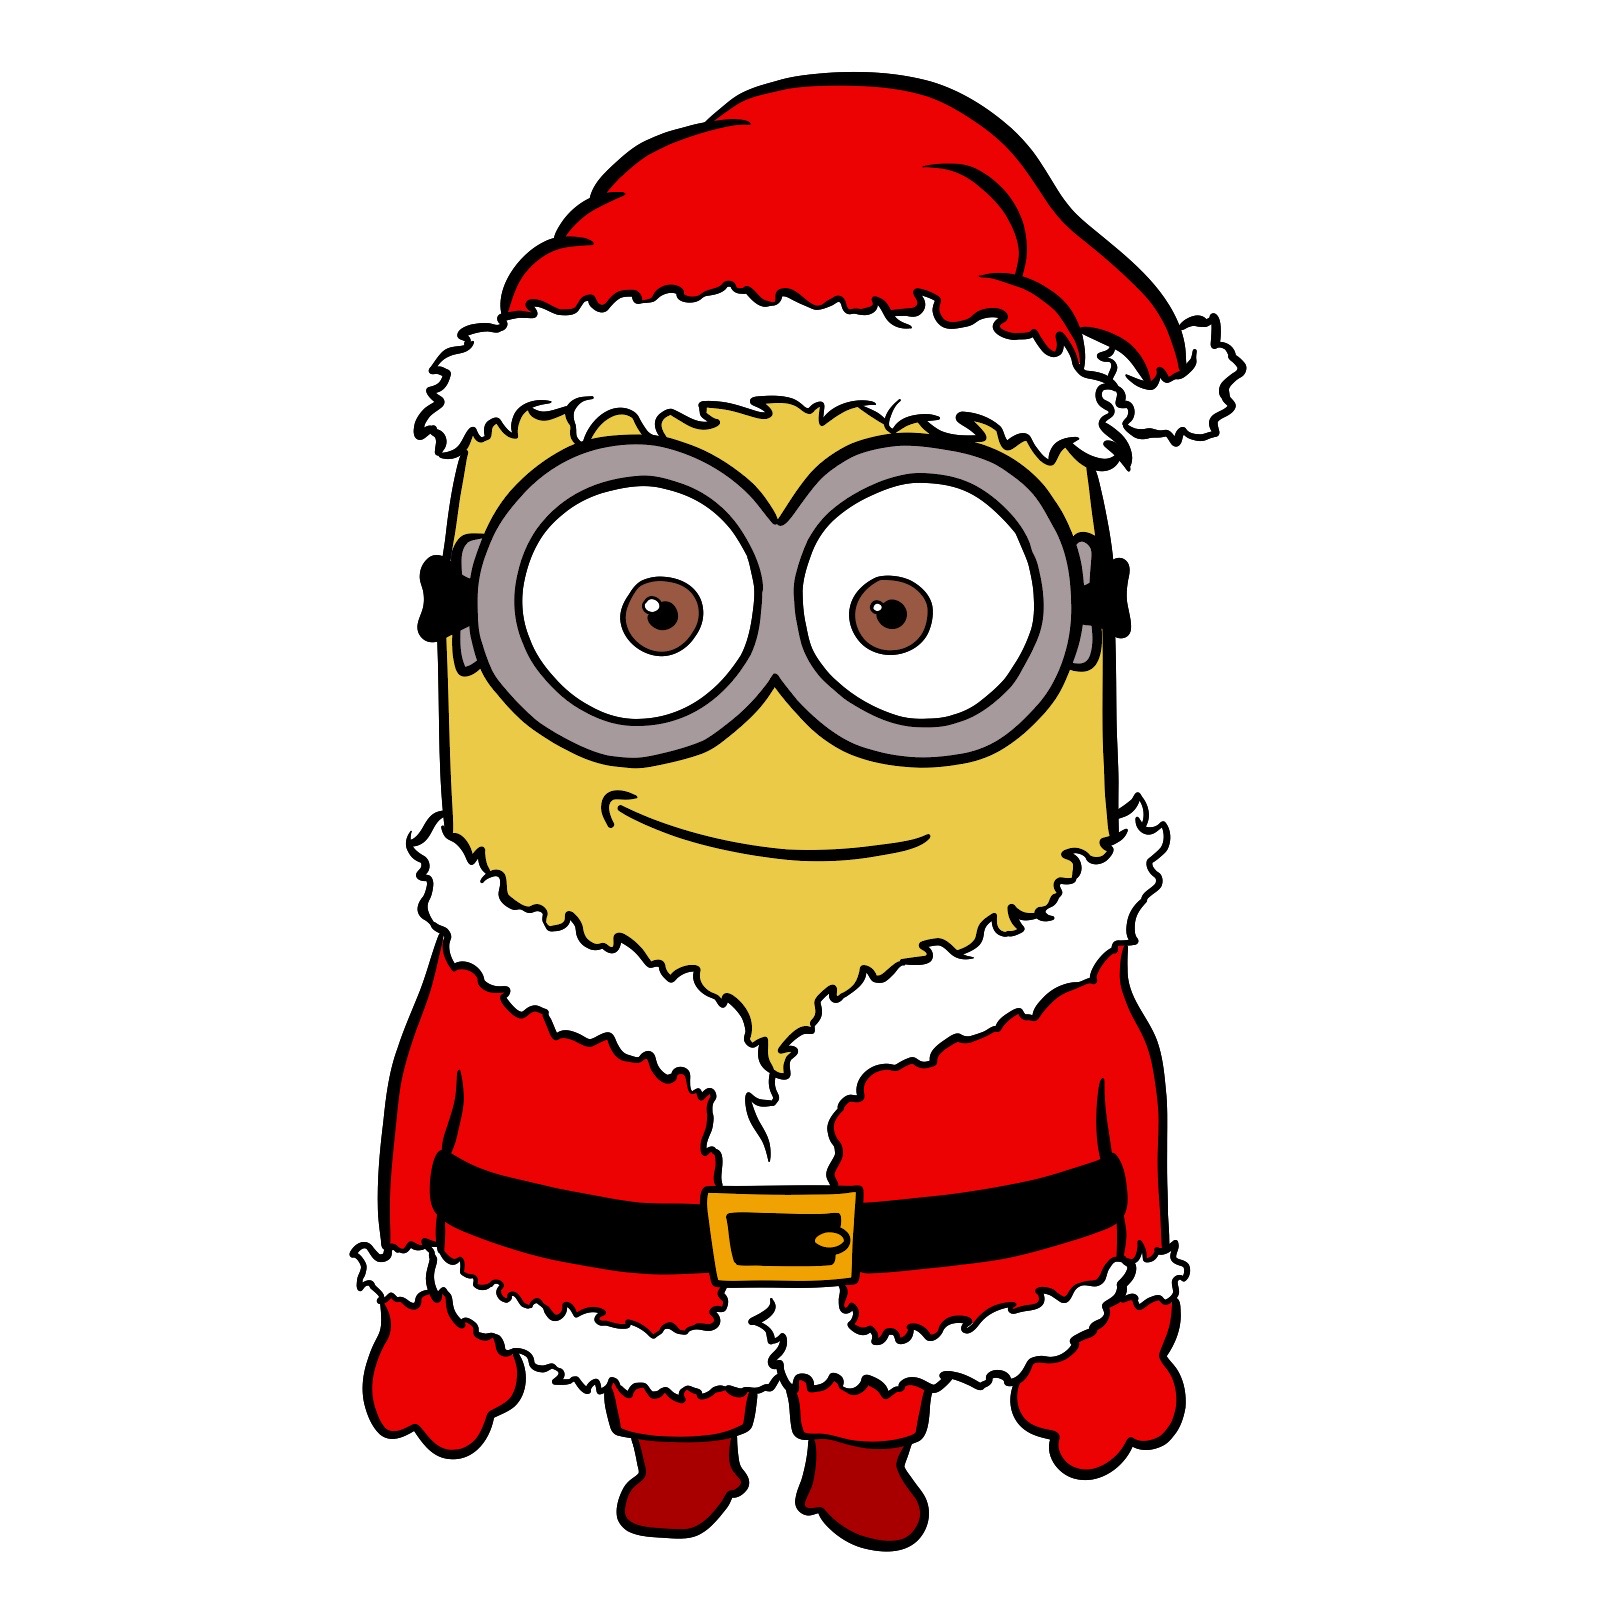 How to draw Santa Minion - Sketchok easy drawing guides